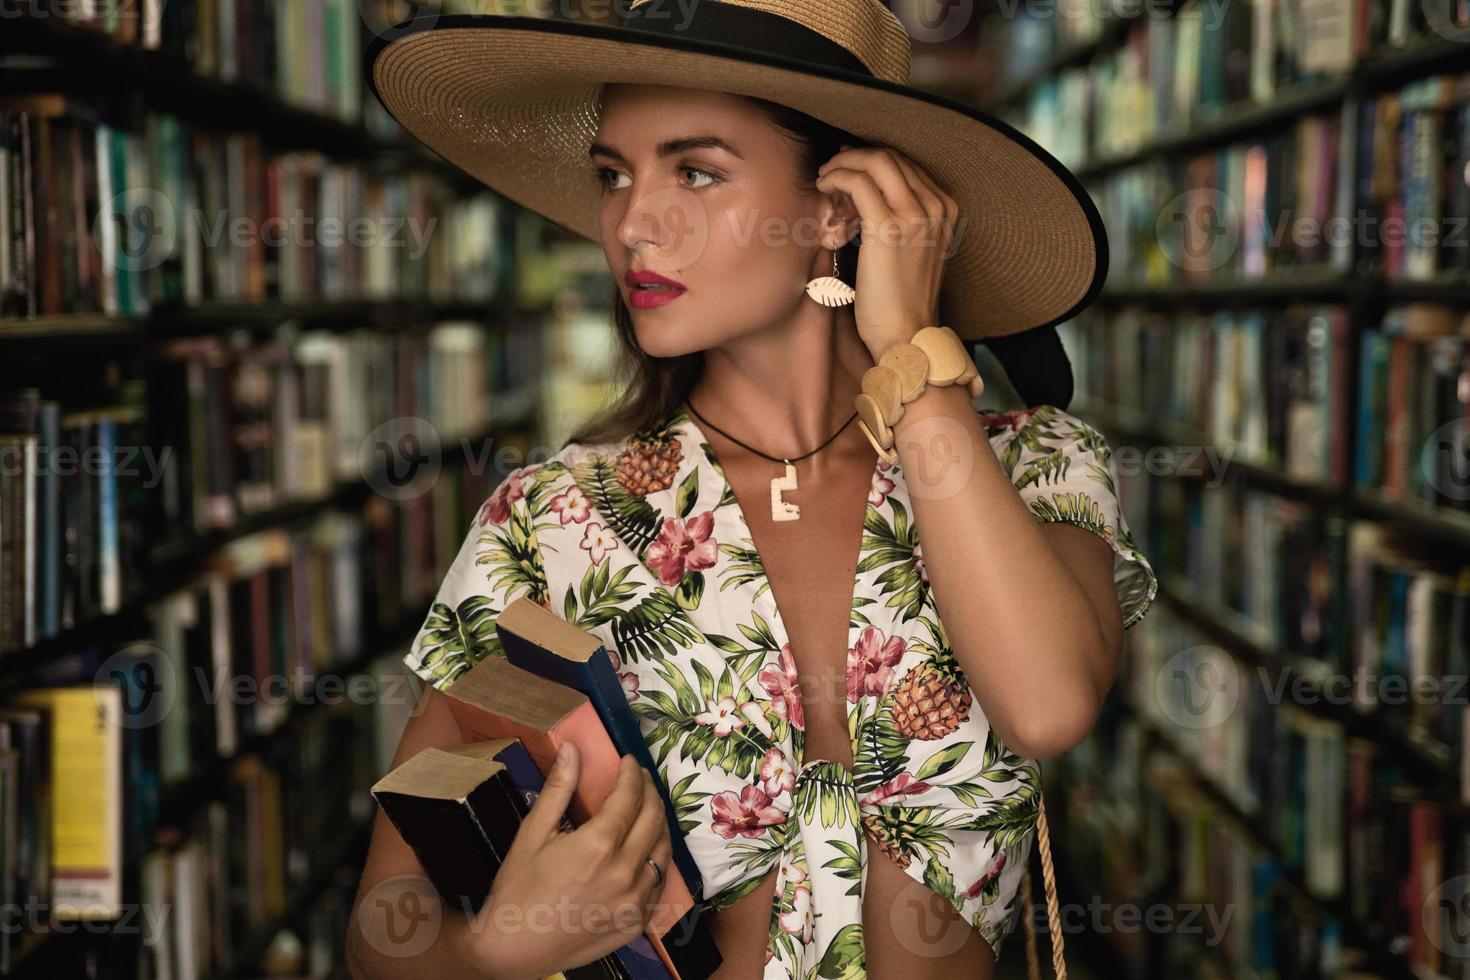 Beautiful girl wearing stylish outfit looking for interesting book in the vintage bookstore photo